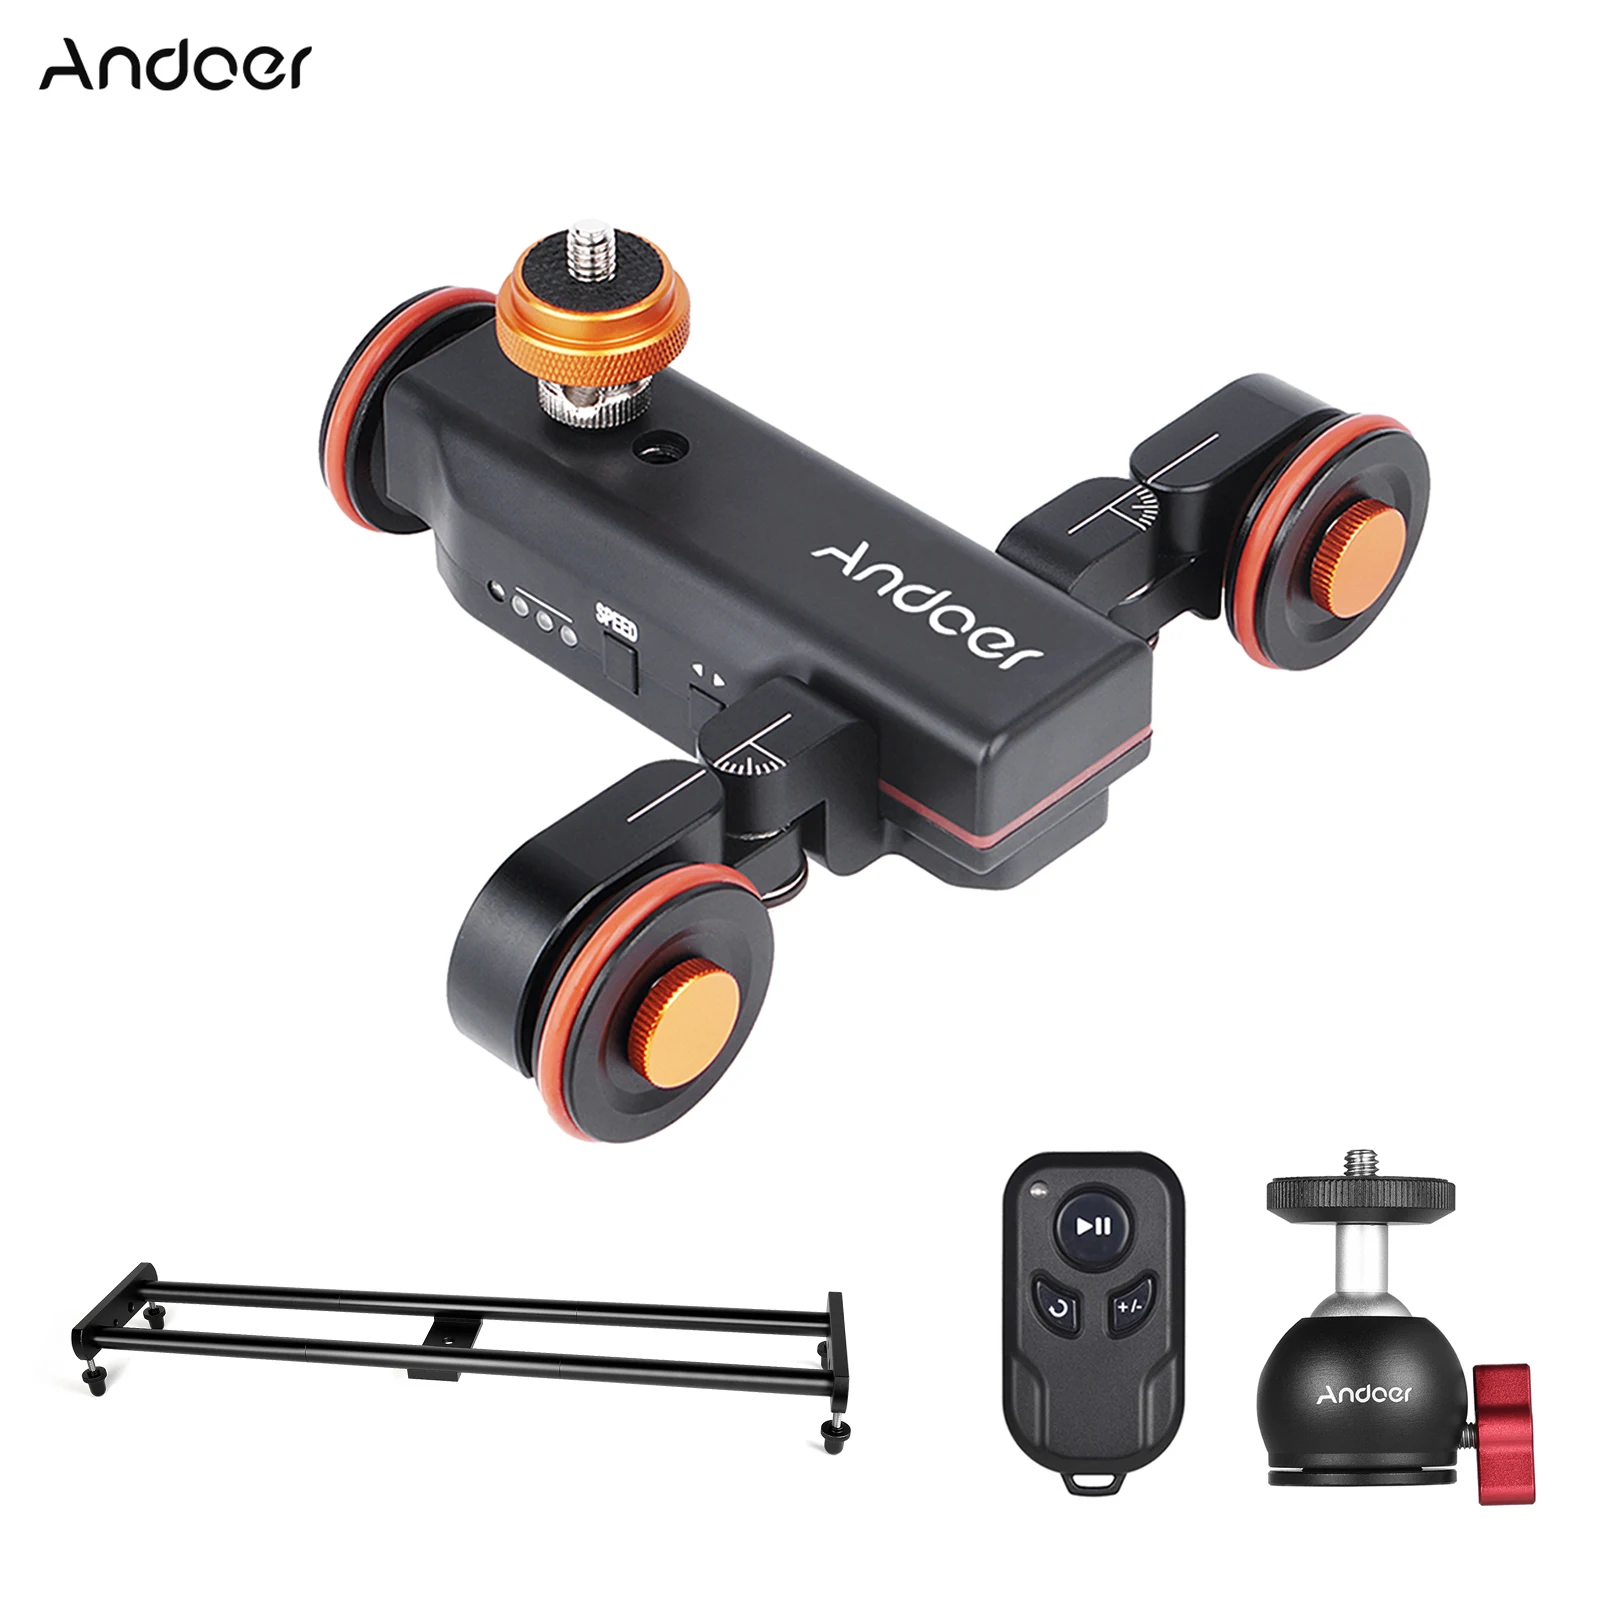 Andoer Mini Motorized Video Slider Track Dolly Rail Tabletop 3-Wheel Pulley Car Skater with Swivel Ball Head/Phone Clip/Remote Control for DSLR Camera Camcorder for iPhone X 8 7 